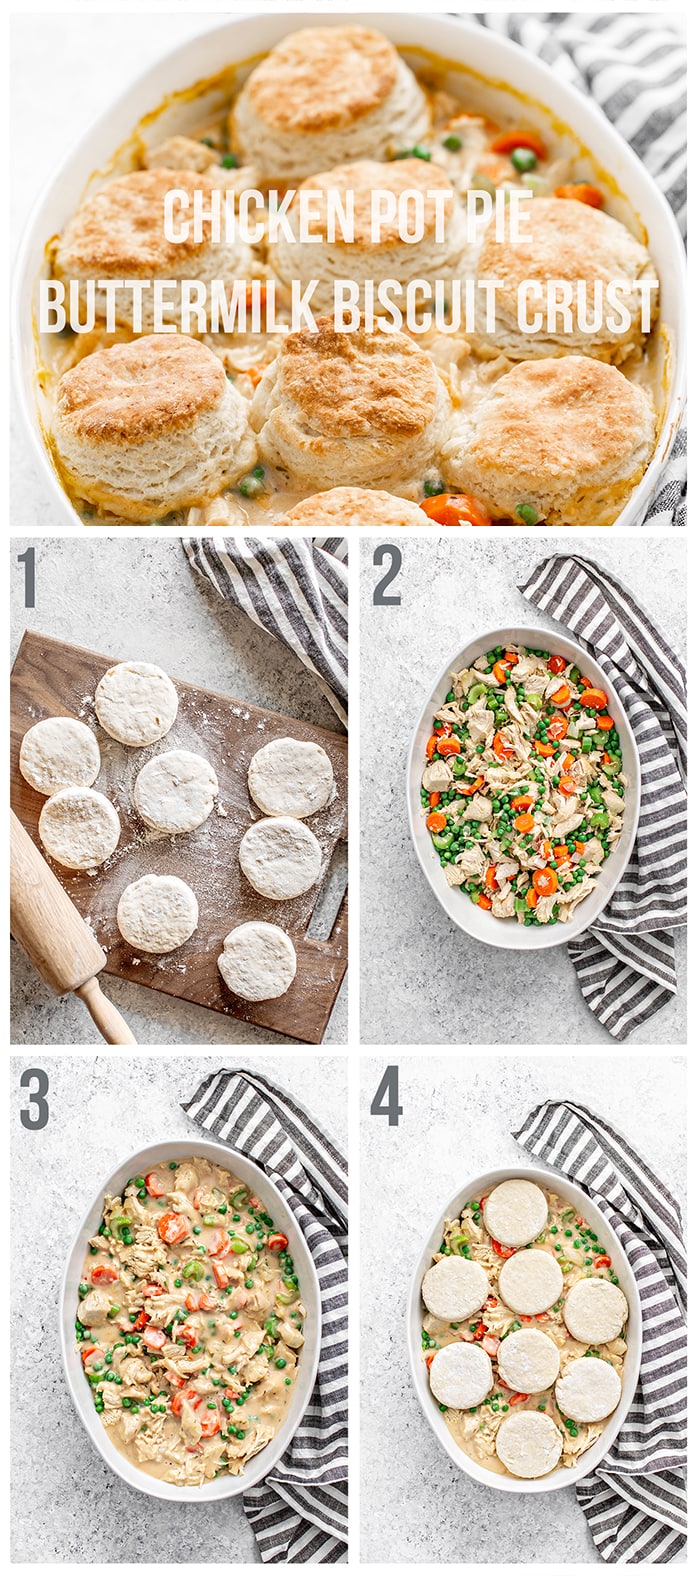 step by step photos detailing how to make chicken pot with with biscuits